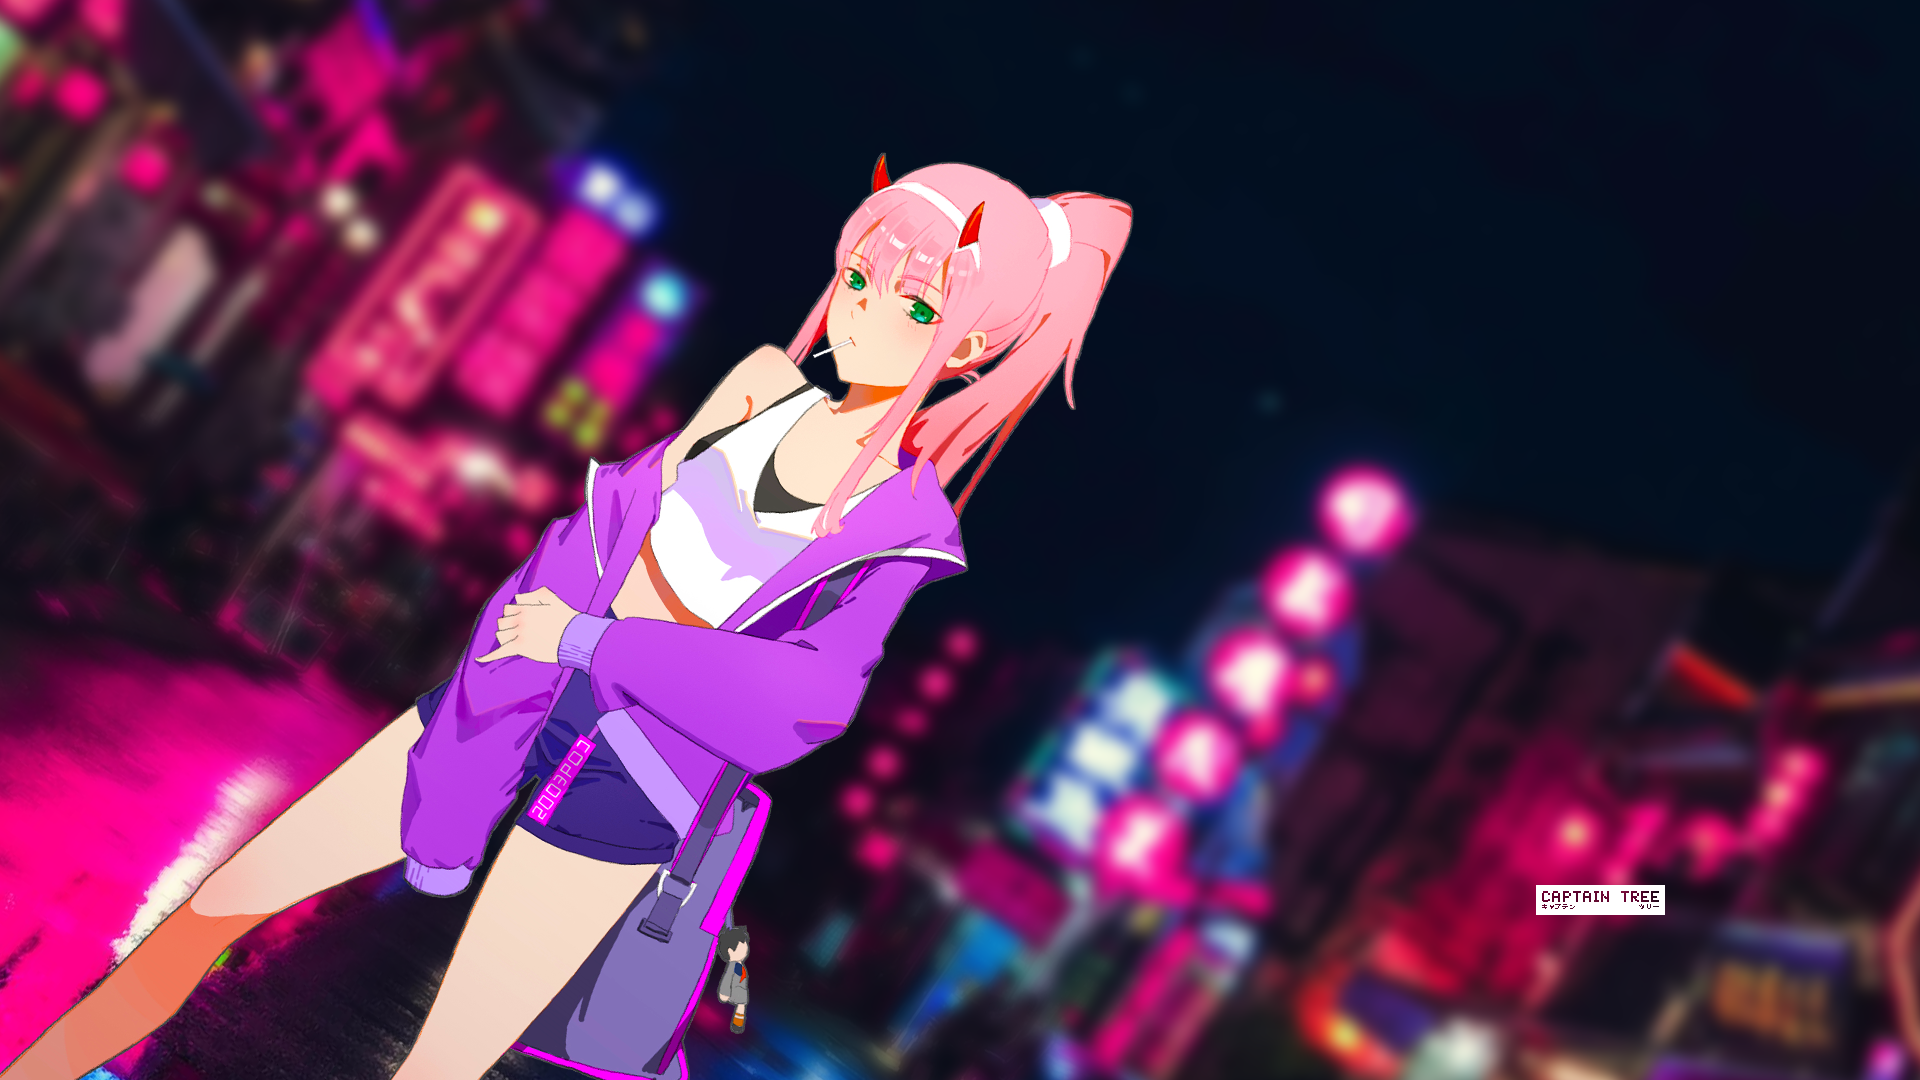 Kawaii Zero Two in The City HD Wallpaper | Background ...